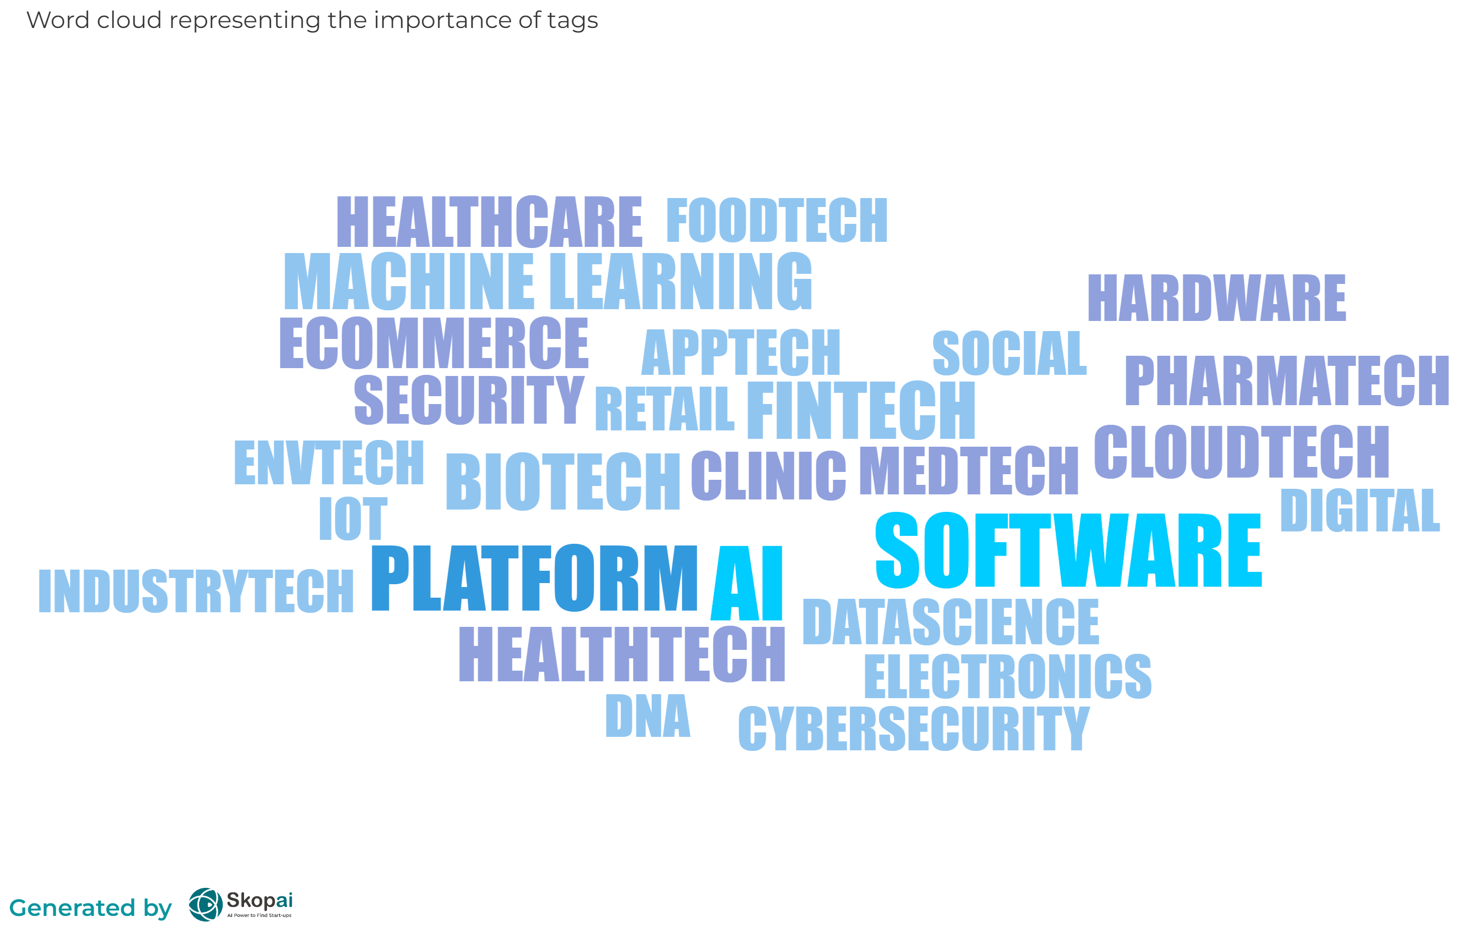 March 2023 start-up fundraising news:  word cloud representing the importance of tags